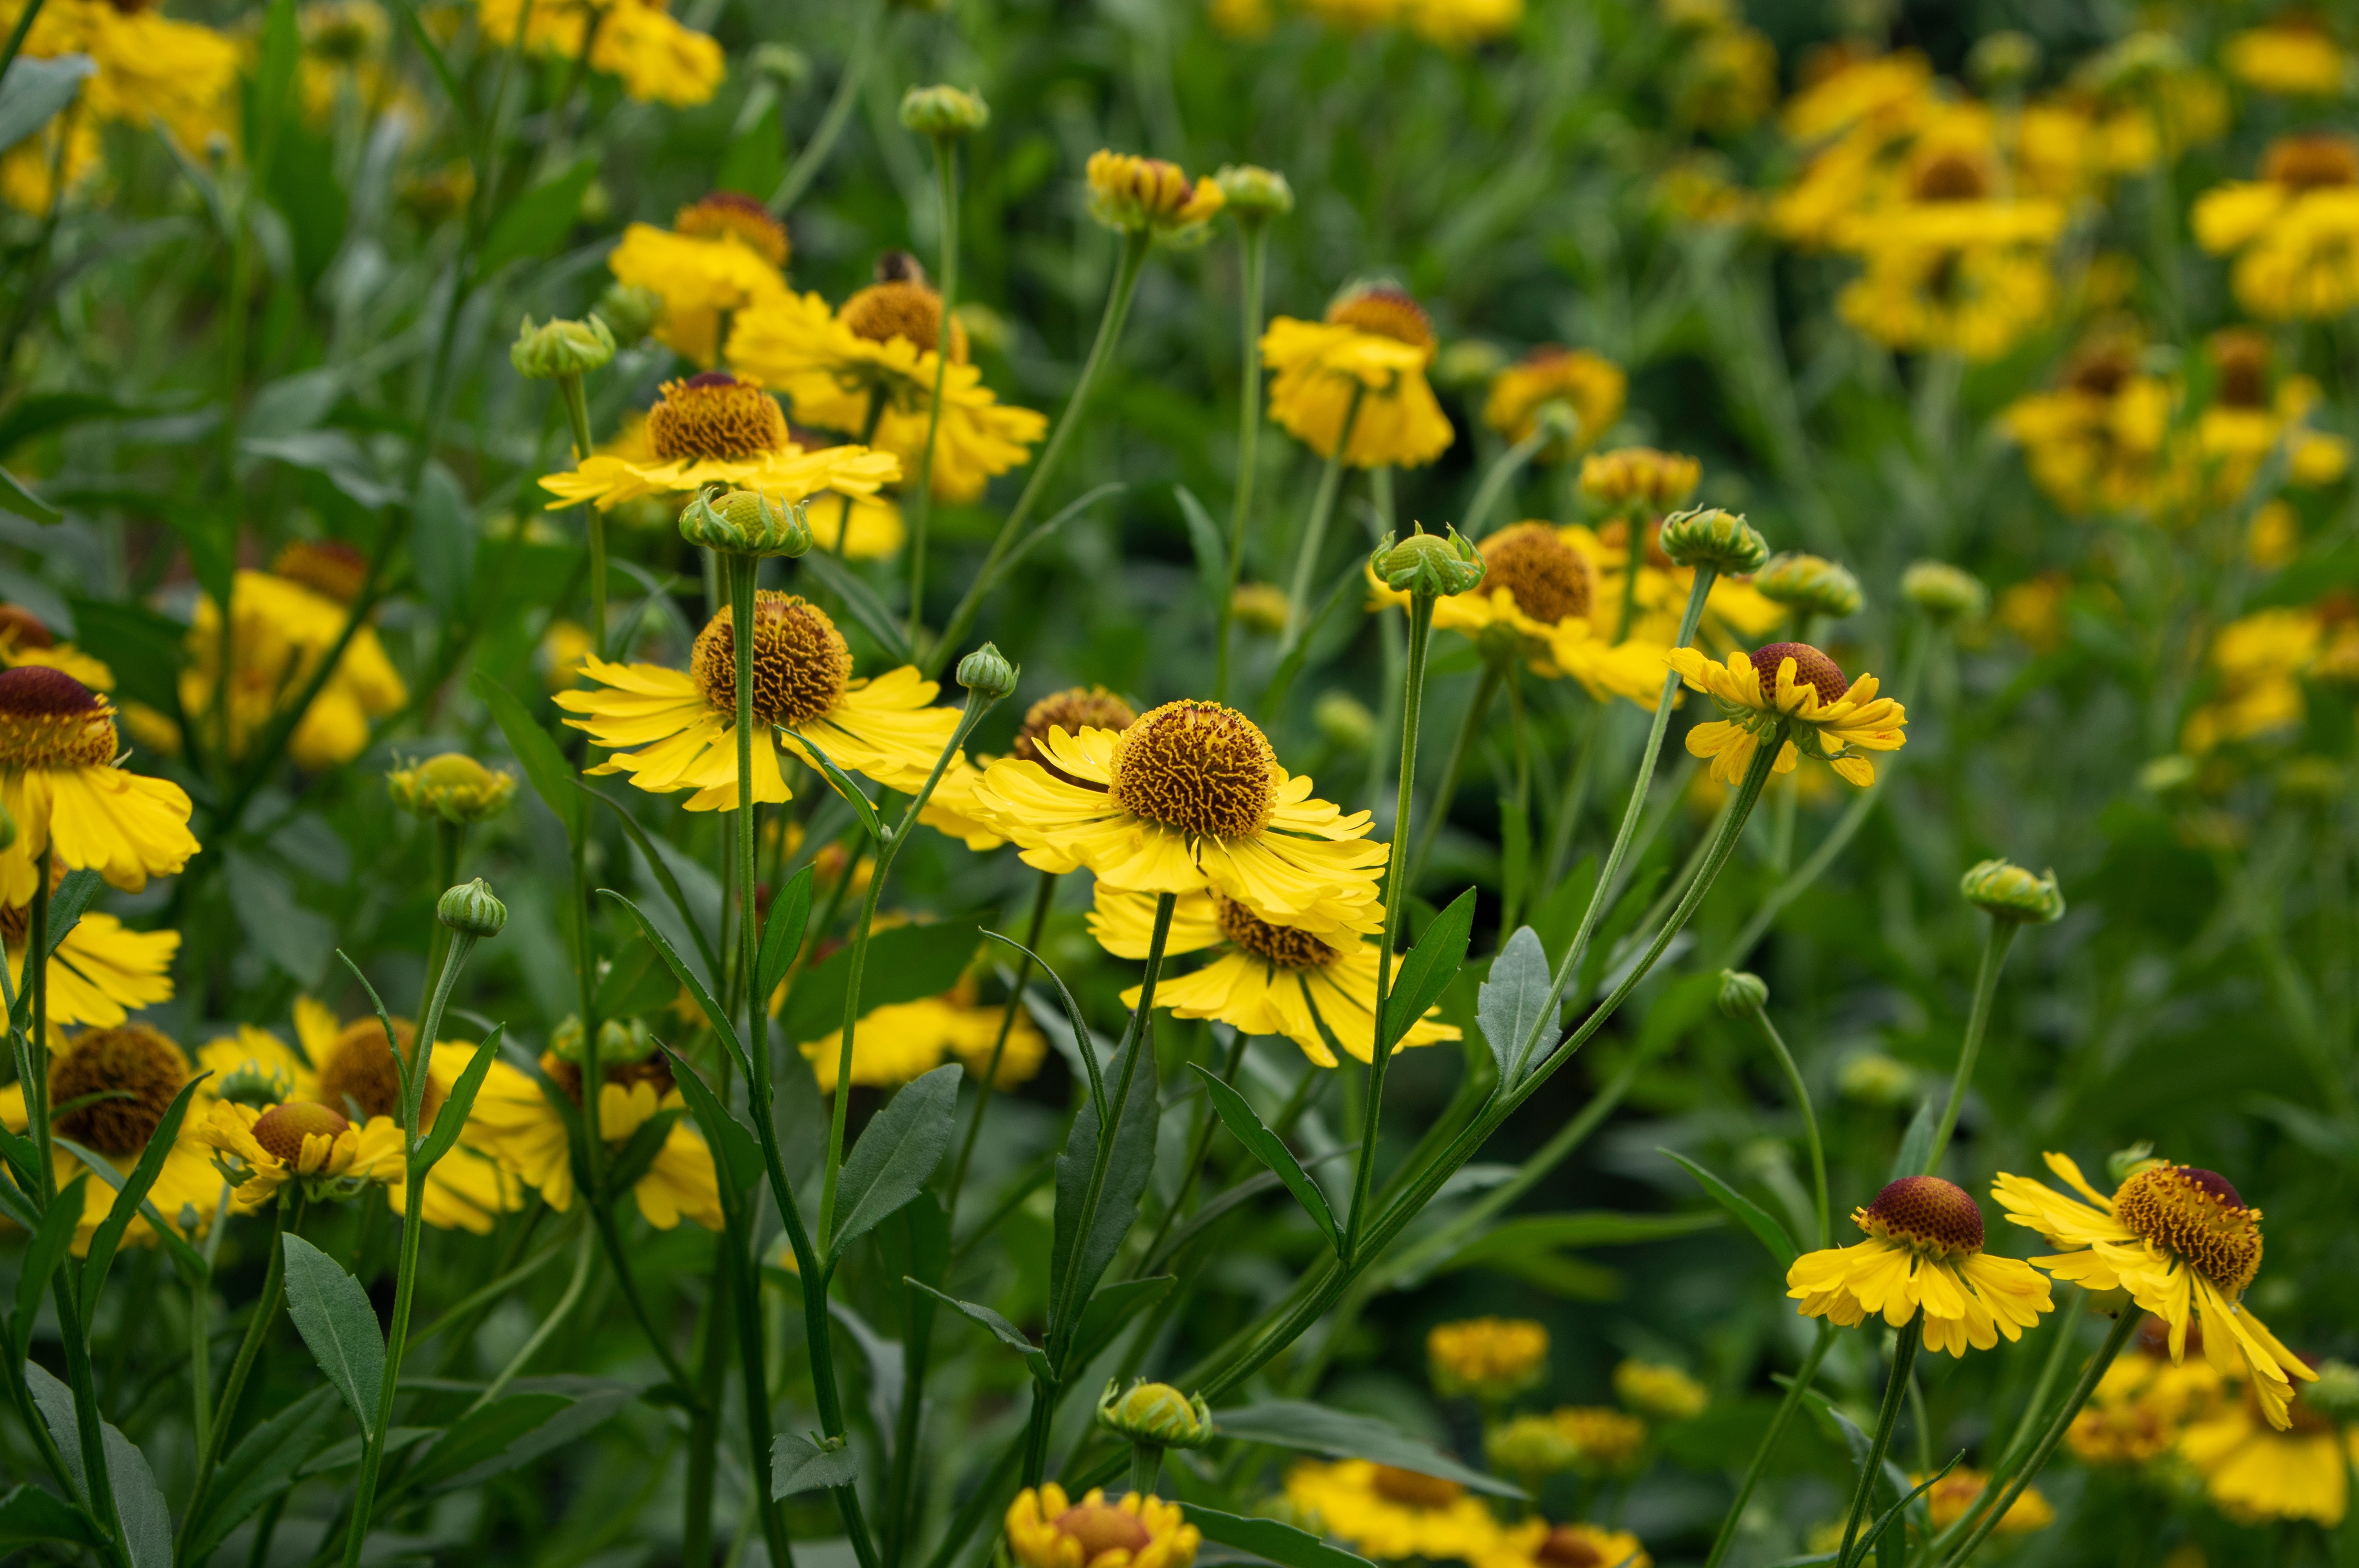 A green field of yellow common sneezeweed flowers.